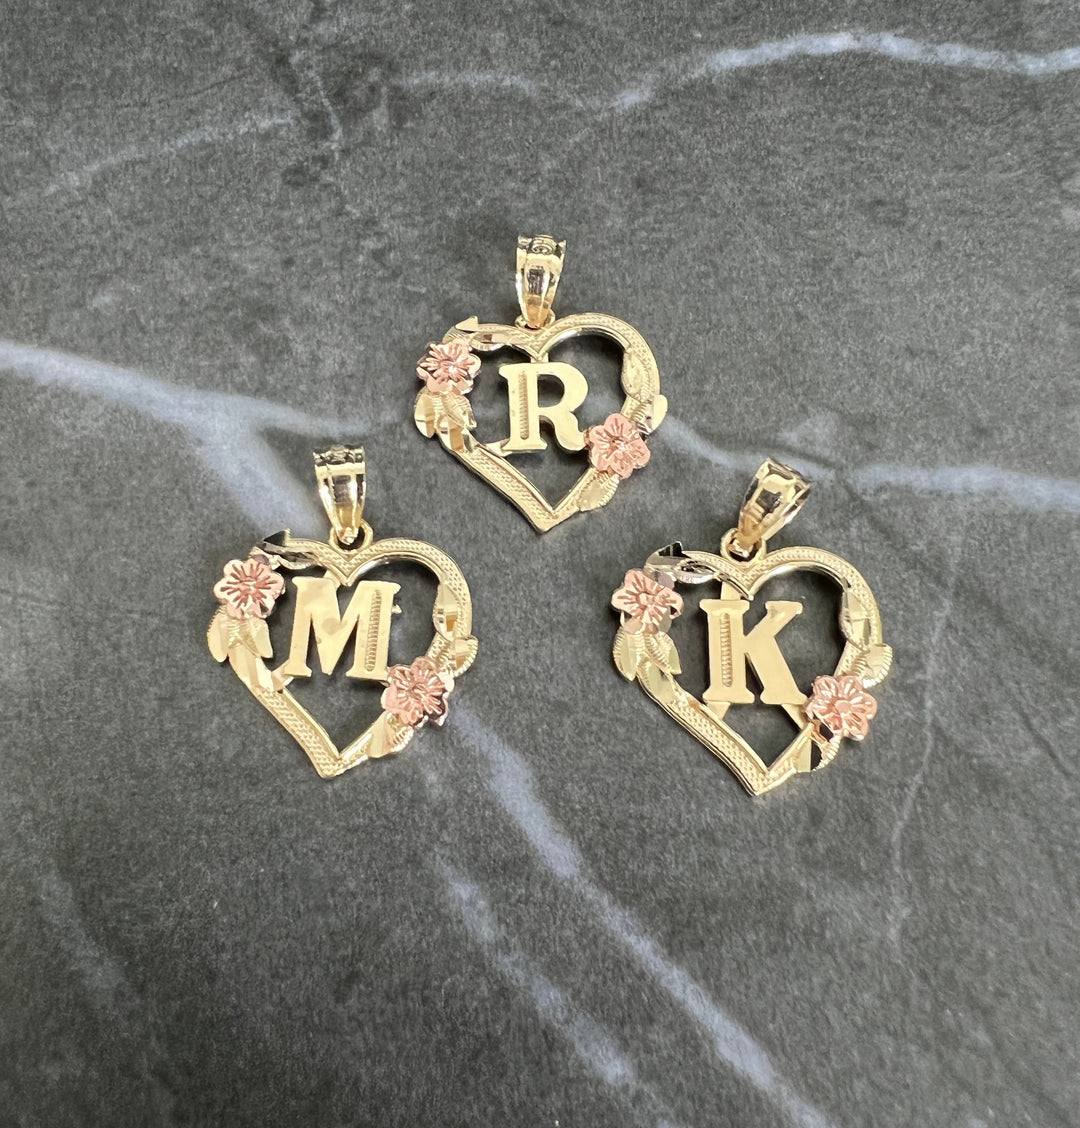 Authentic 10K Initial Letter Charm/ Pendant with Gold Heart and Flower/Rose Diamond Cut Design For Girls/Women, A-Z Flower Necklace Charm